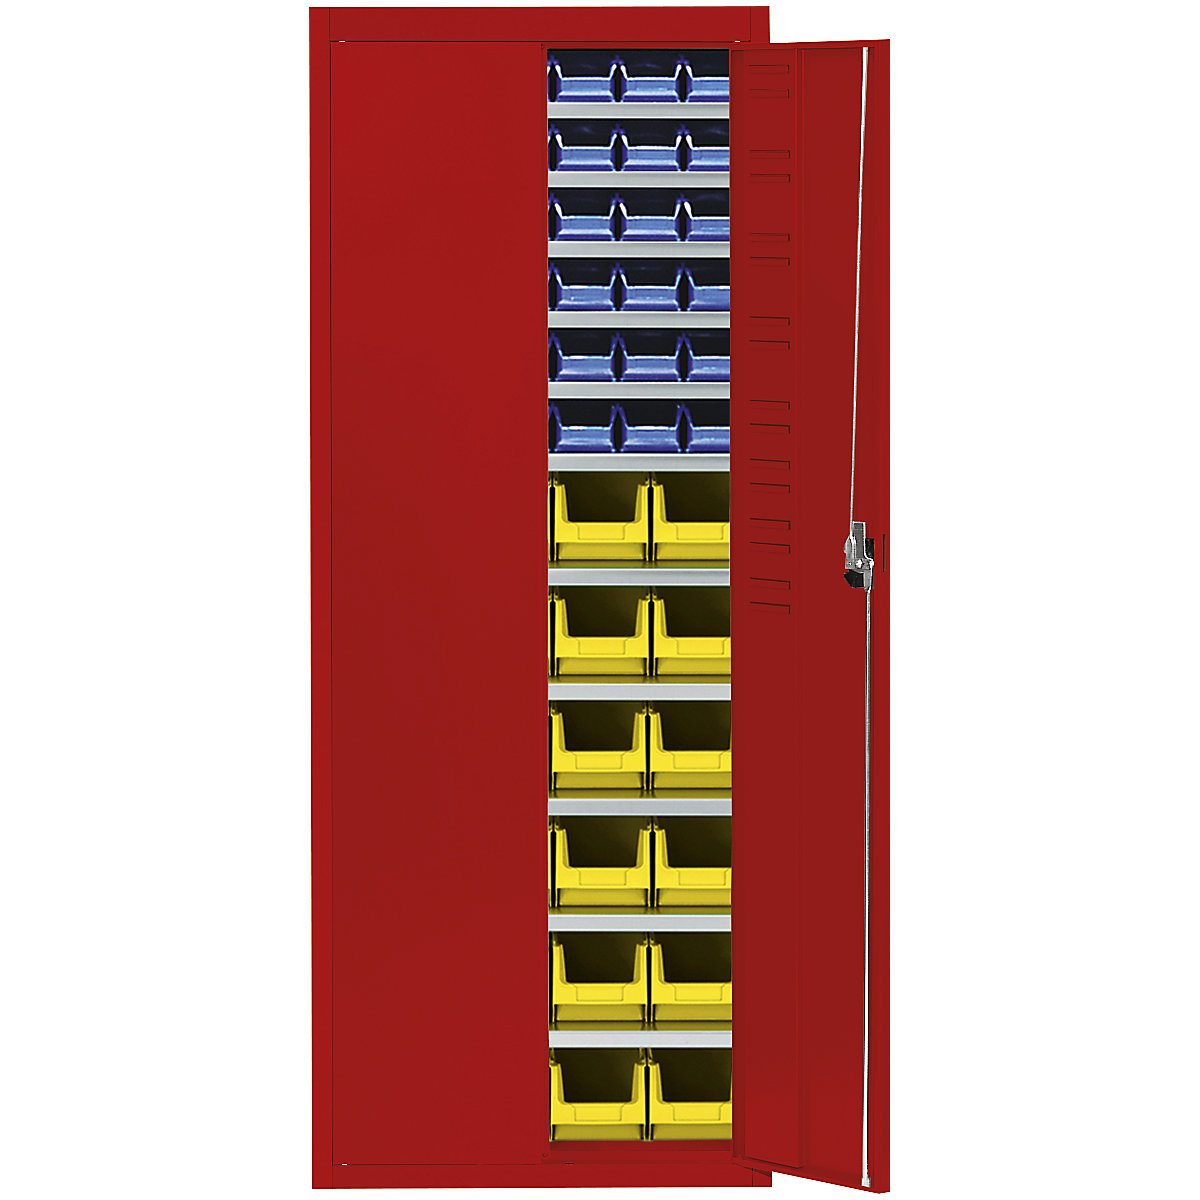 Storage cupboard with open fronted storage bins – mauser, HxWxD 1740 x 680 x 280 mm, single colour, red, 60 bins-15